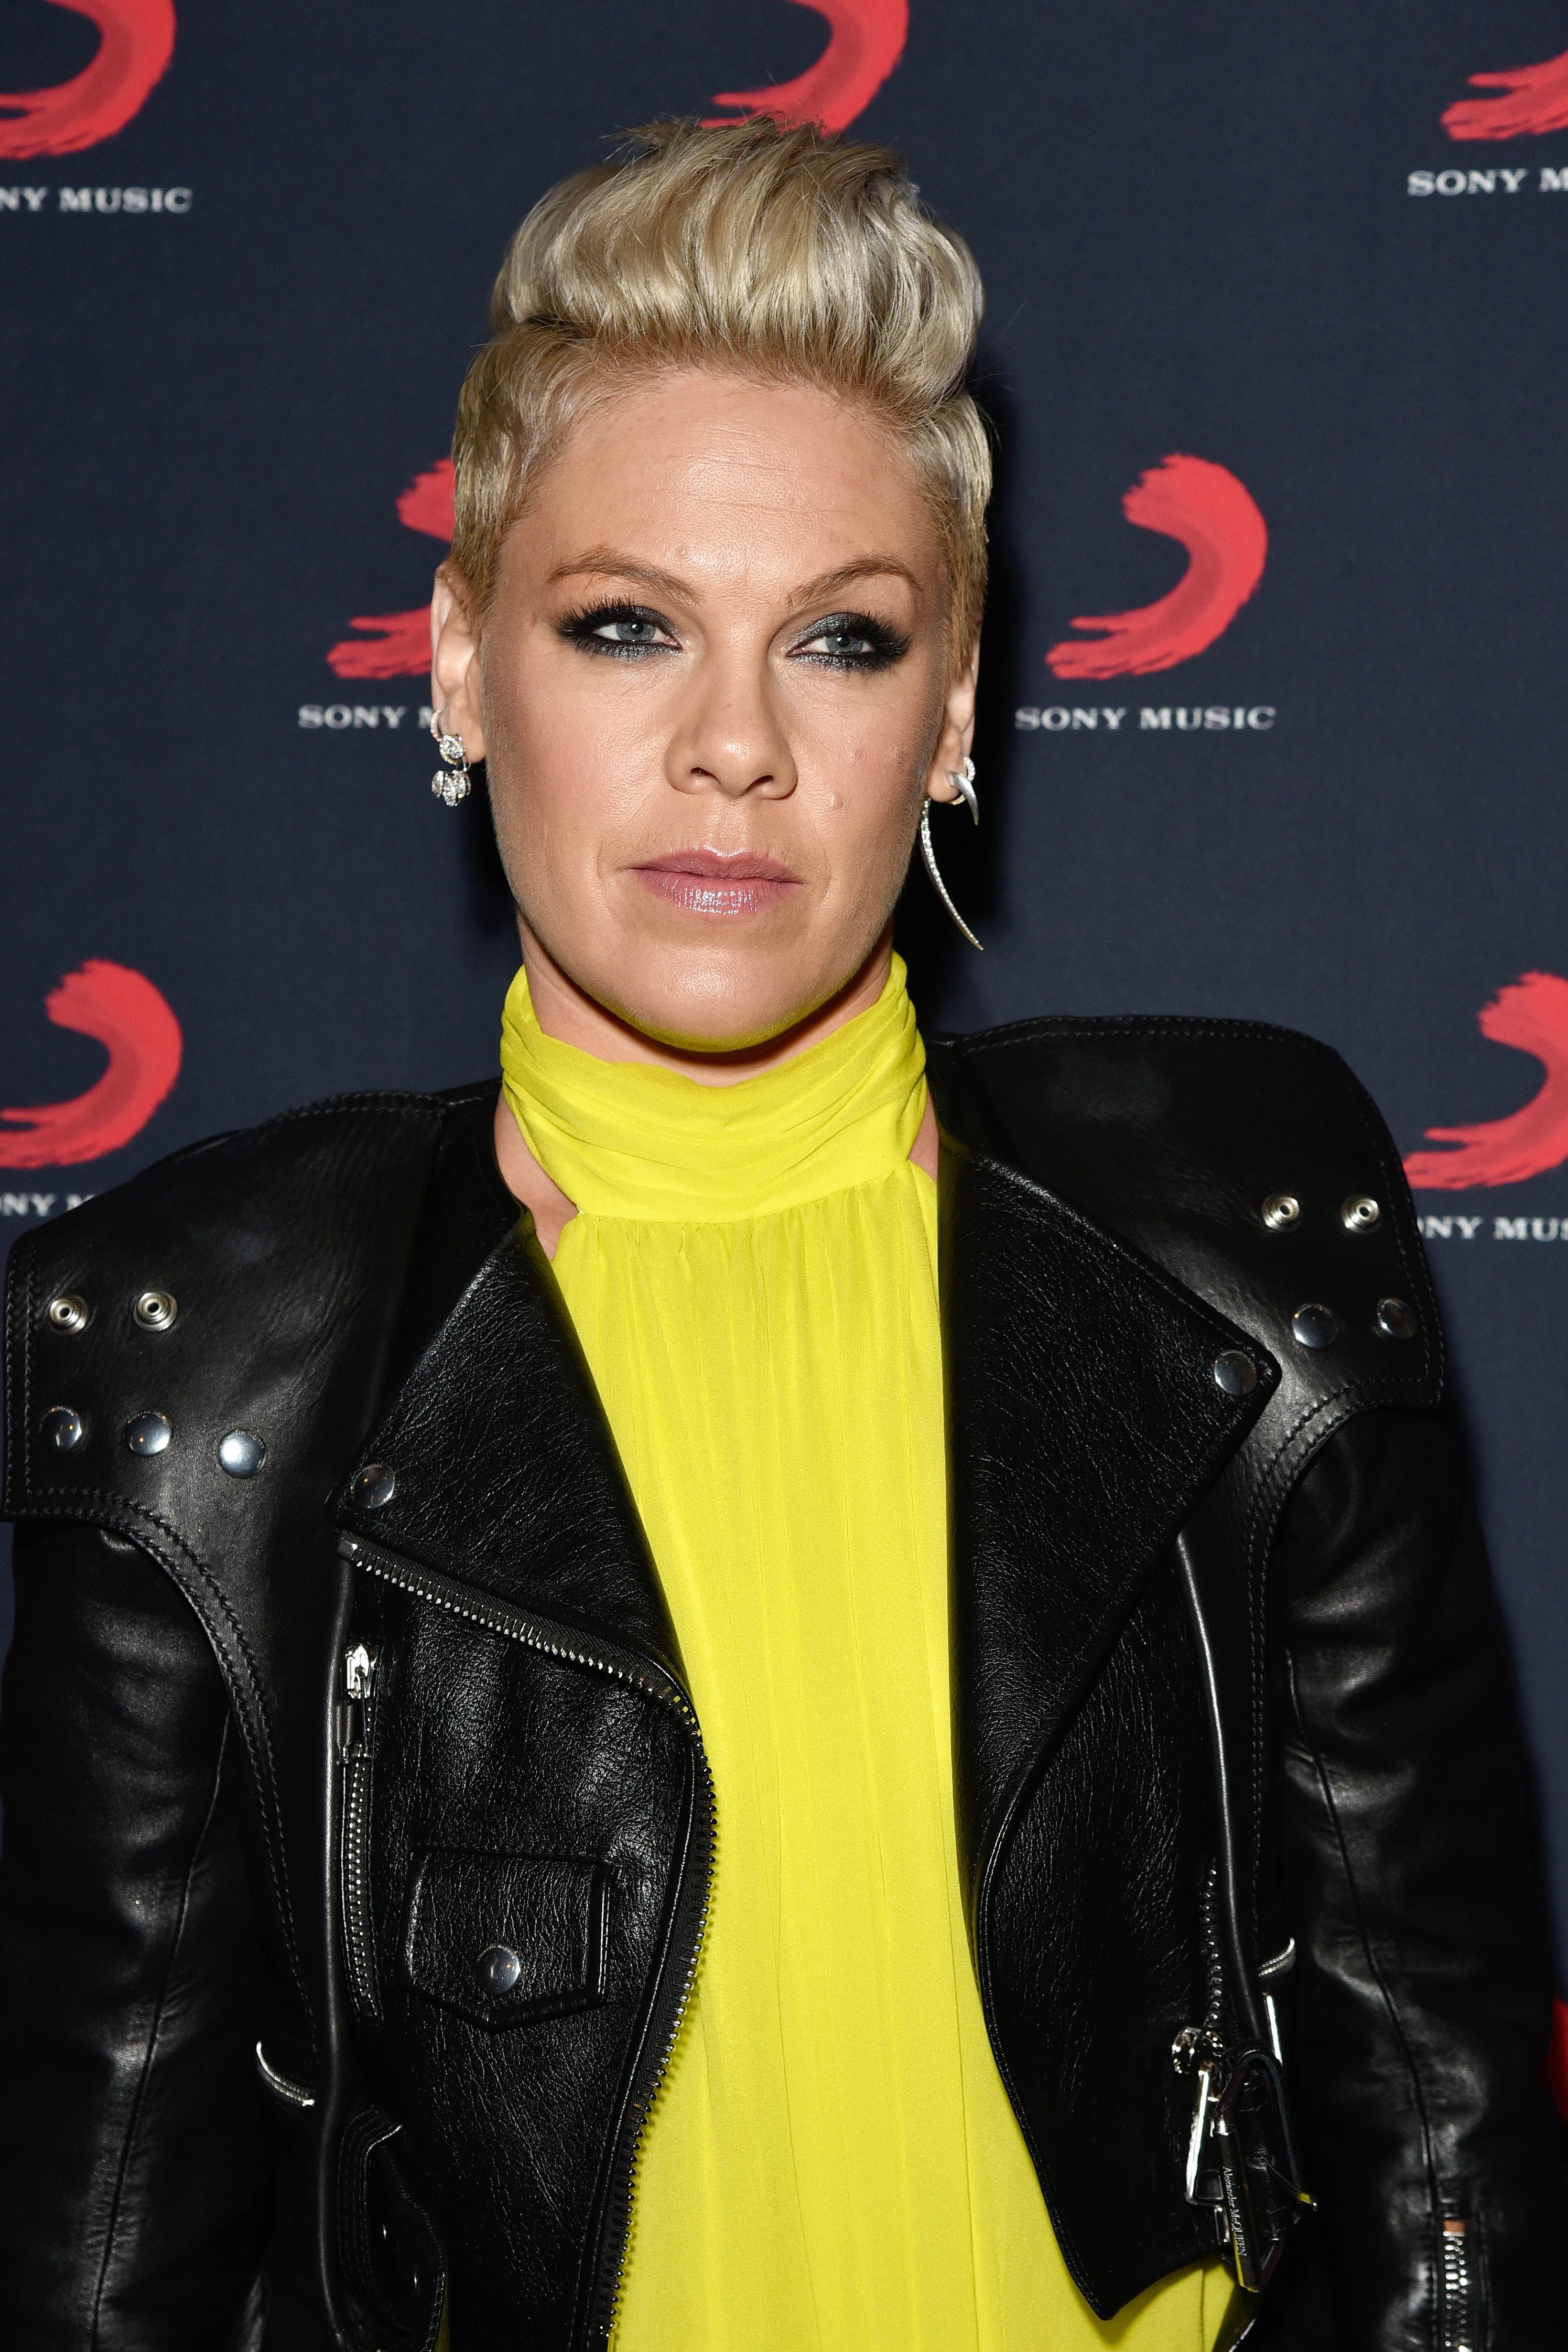 Pink arrives at The BRIT Awards 2019 Sony after-party on February 20, 2019, in London, England | Photo: HGL/Getty Images